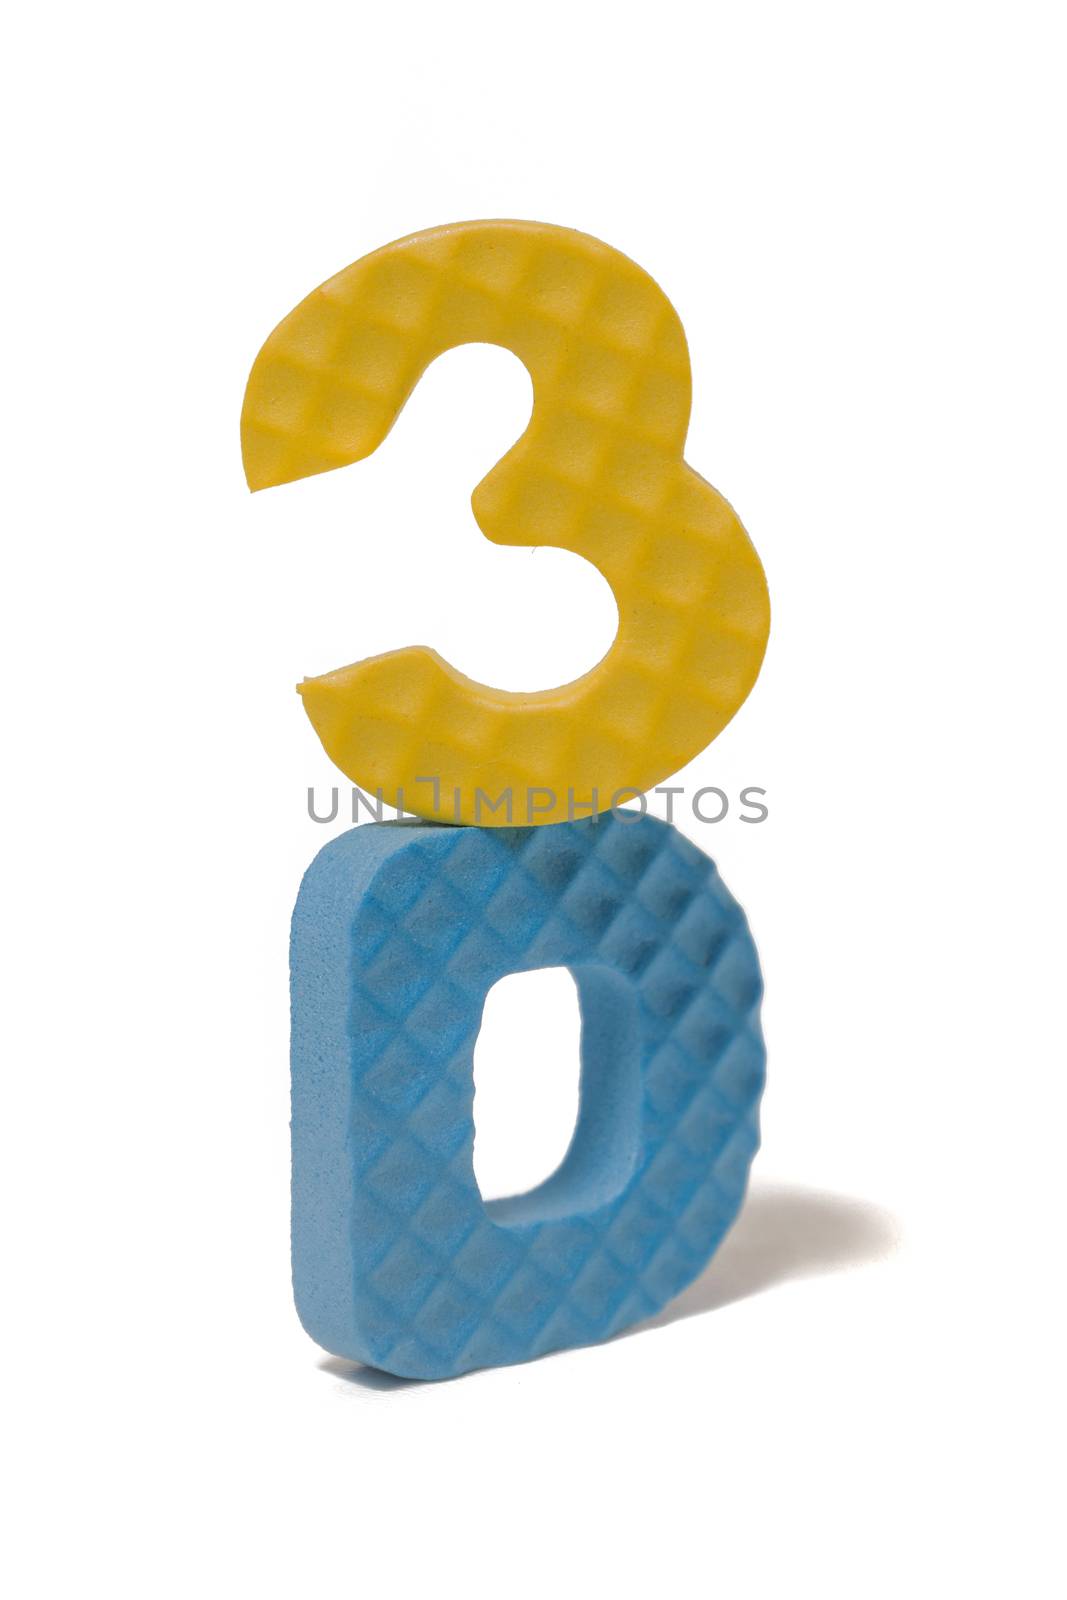 Foam letter uppercase with word 3D isolated on a white background.